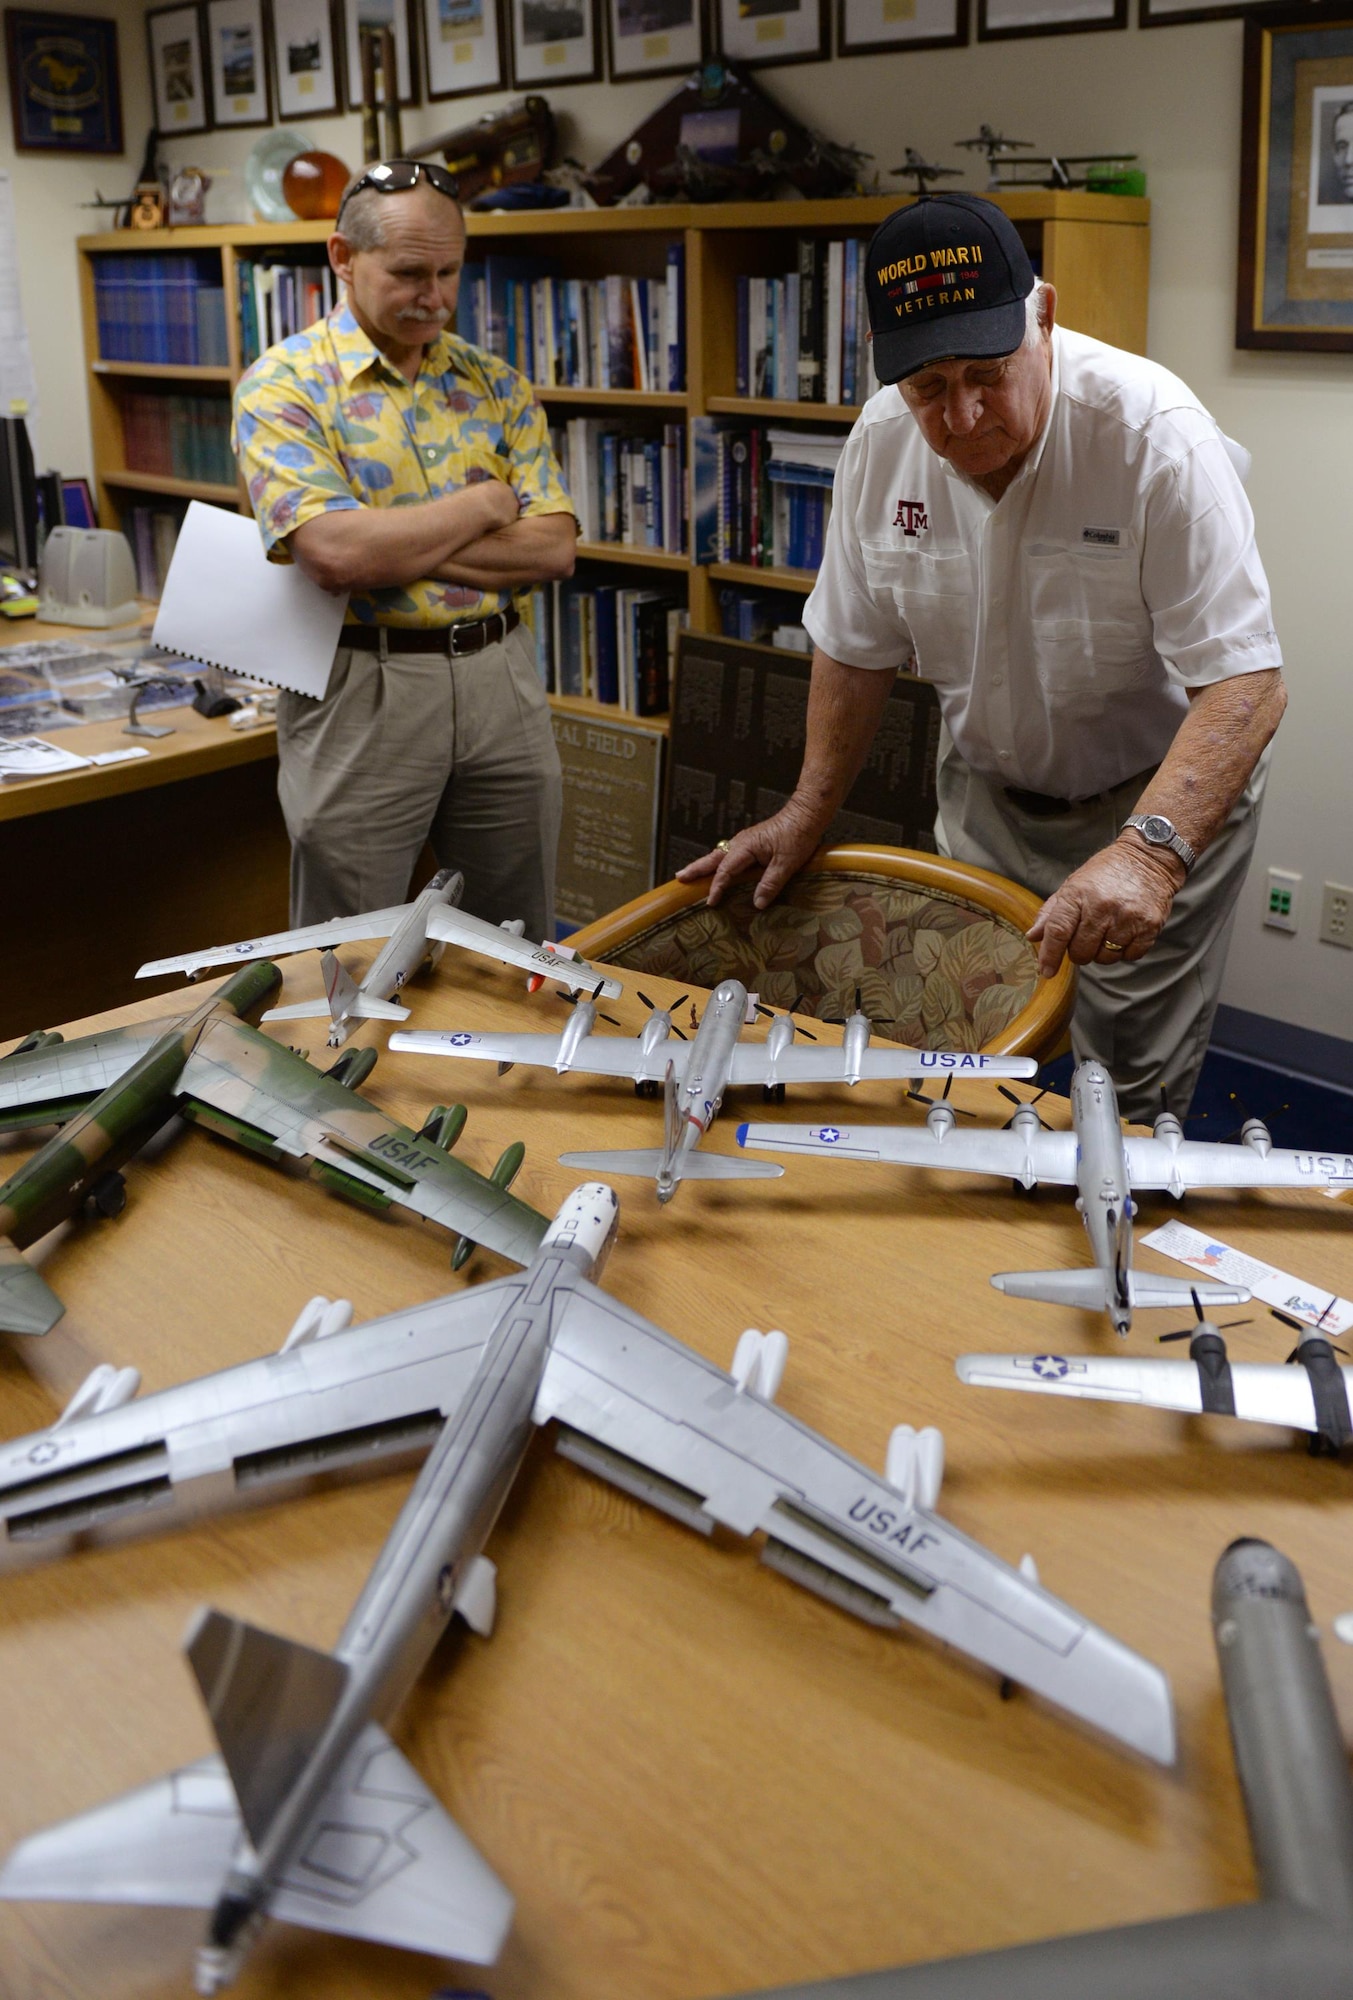 Rowland Ball, a World War II veteran, looks at an assortment of model aircraft during a visit to Andersen Air Force Base, Guam, Aug. 16, 2016. Ball served in the United States Army Air Corps as a B-29 Superfortress navigator during the tail end of World War II, where he flew 27 missions out of Guam. (U.S. Air Force photo by Staff Sgt. Benjamin Gonsier)